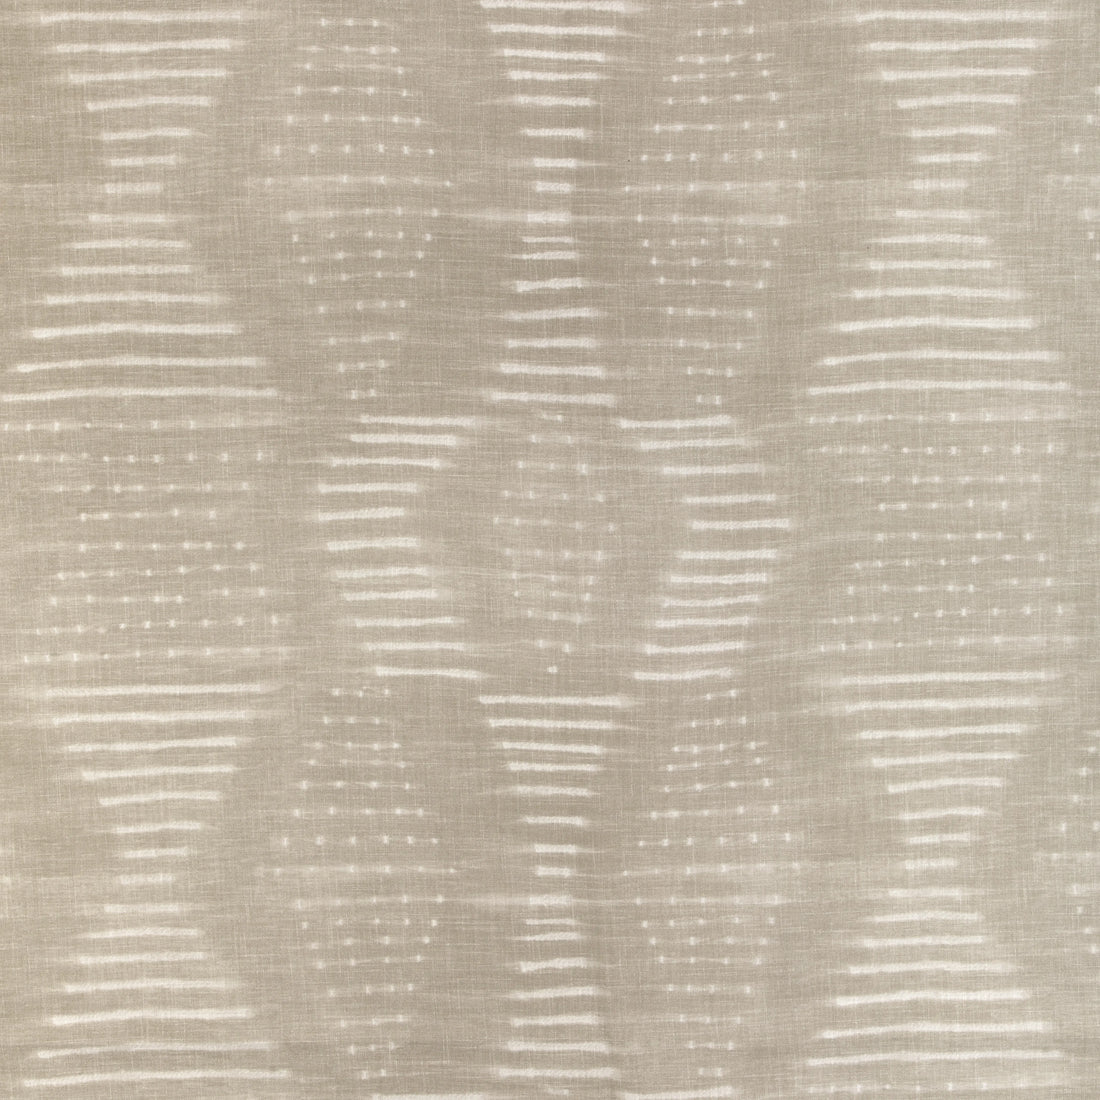 Lattimer fabric in driftwood color - pattern LATTIMER.16.0 - by Kravet Couture in the Riviera collection